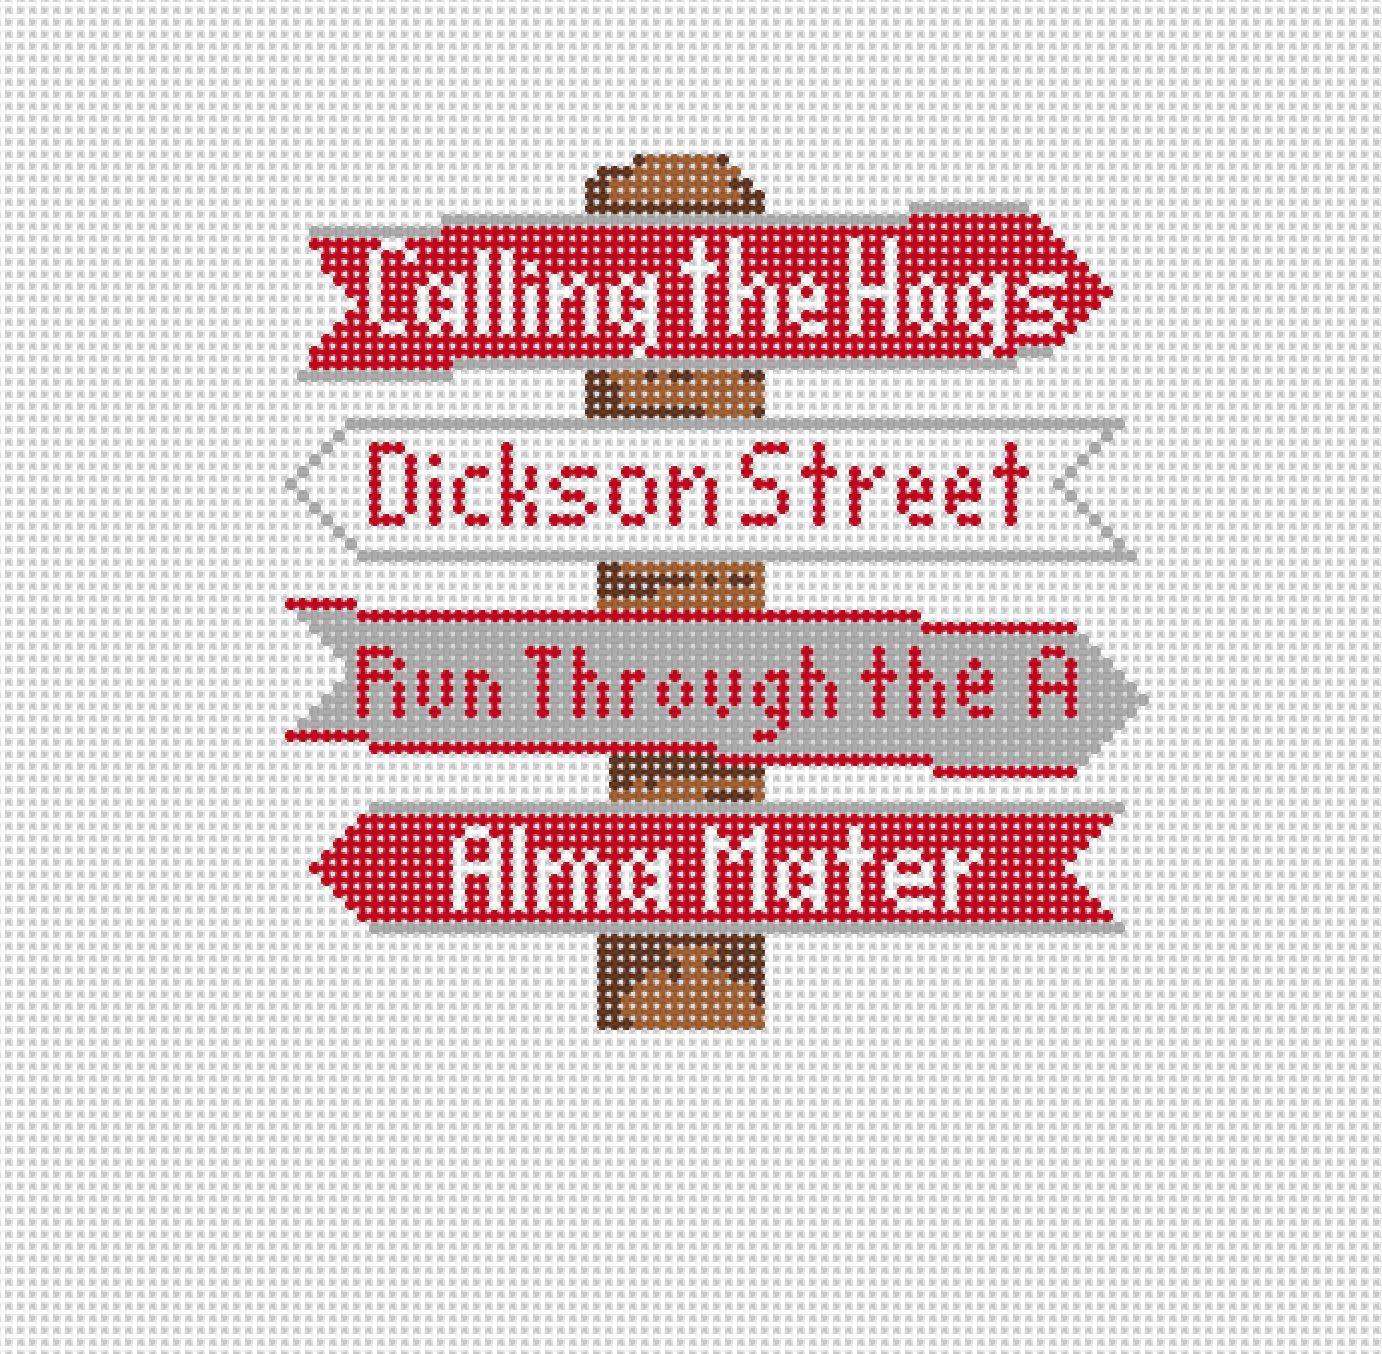 Arkansas College Icon Destination Sign - Needlepoint by Laura